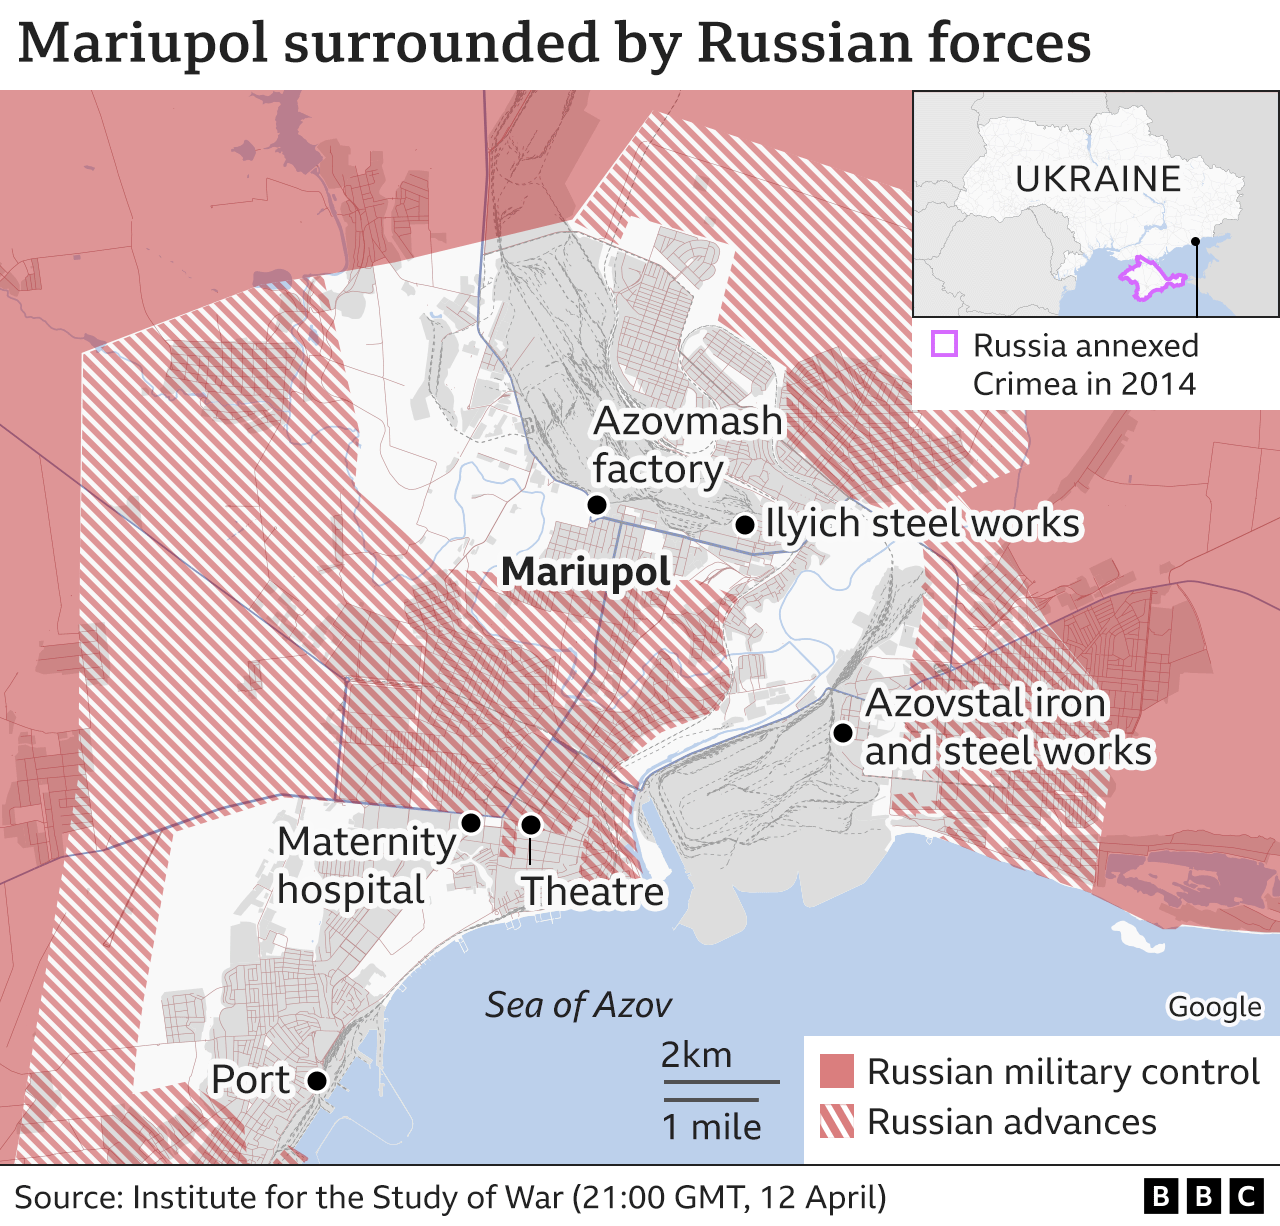 BBC map showing control of Mariupol